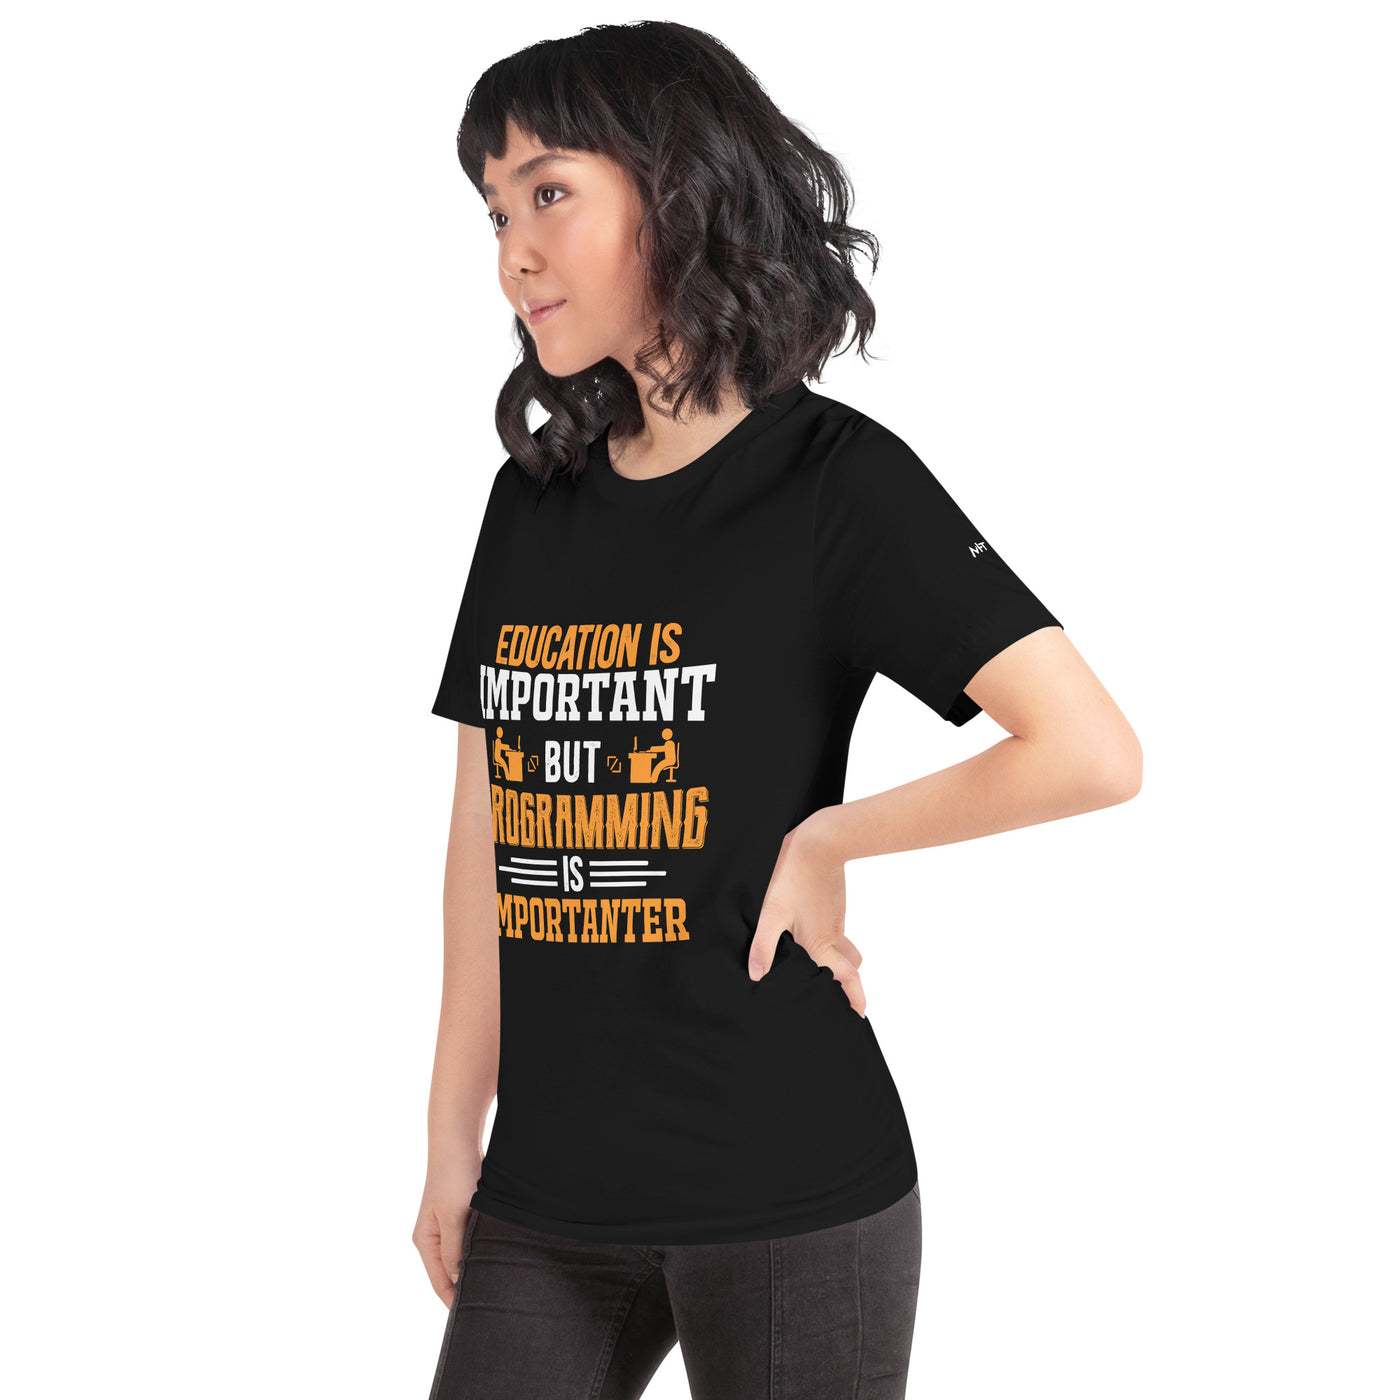 Education is important, but Programming is importanter - Unisex t-shirt